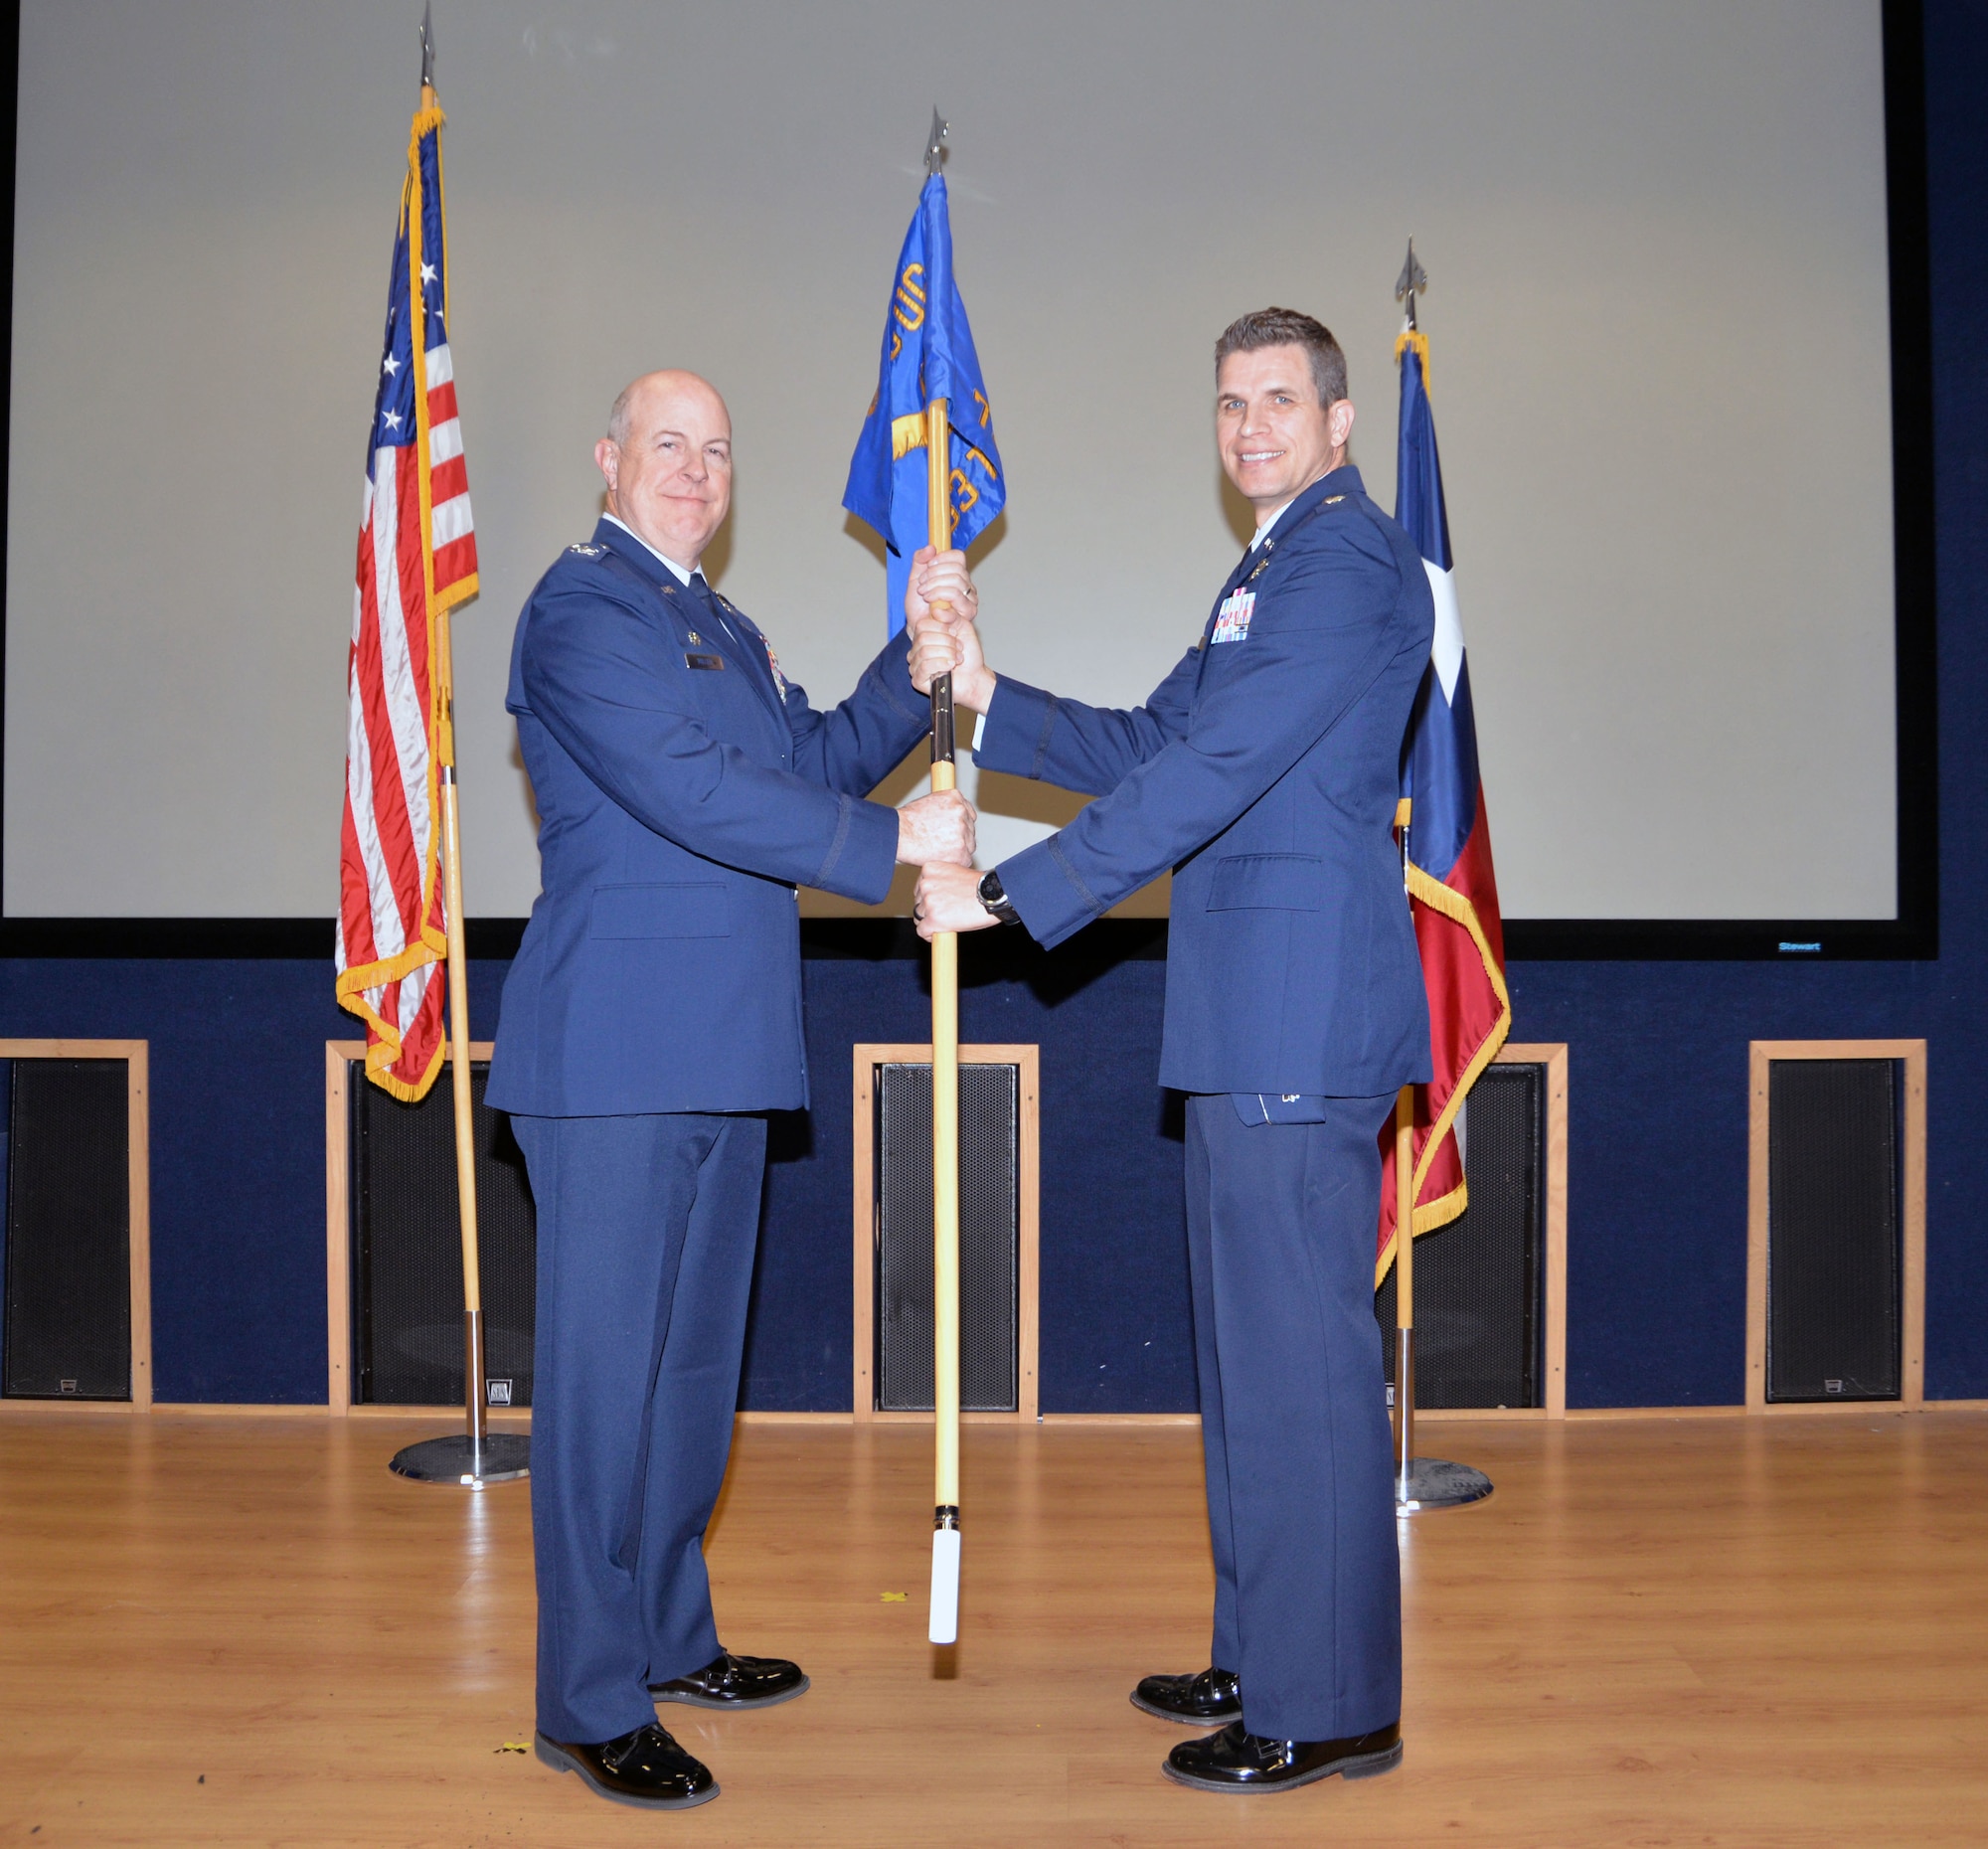 Col. James “J.C.” Miller, 433rd Operations Group commander, hands the 733rd Training Squadron’s guidon to Lt. Col. Seth W. Asay signifying the transition of command Dec. 7, 2019 at Joint Base San Antonio-Lackland, Texas.